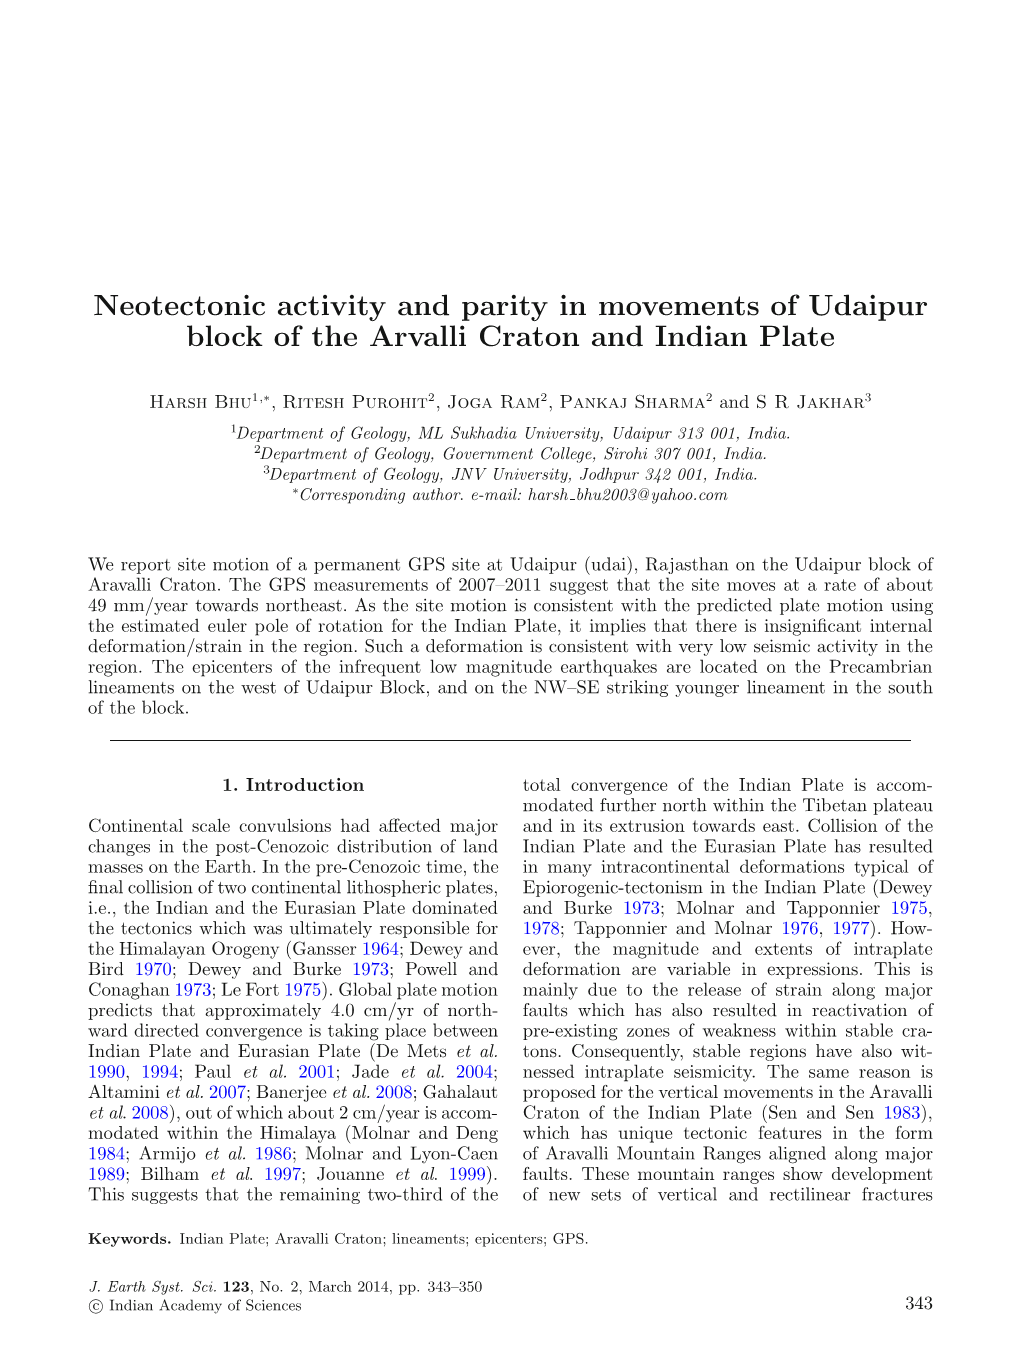 Neotectonic Activity and Parity in Movements of Udaipur Block of the Arvalli Craton and Indian Plate